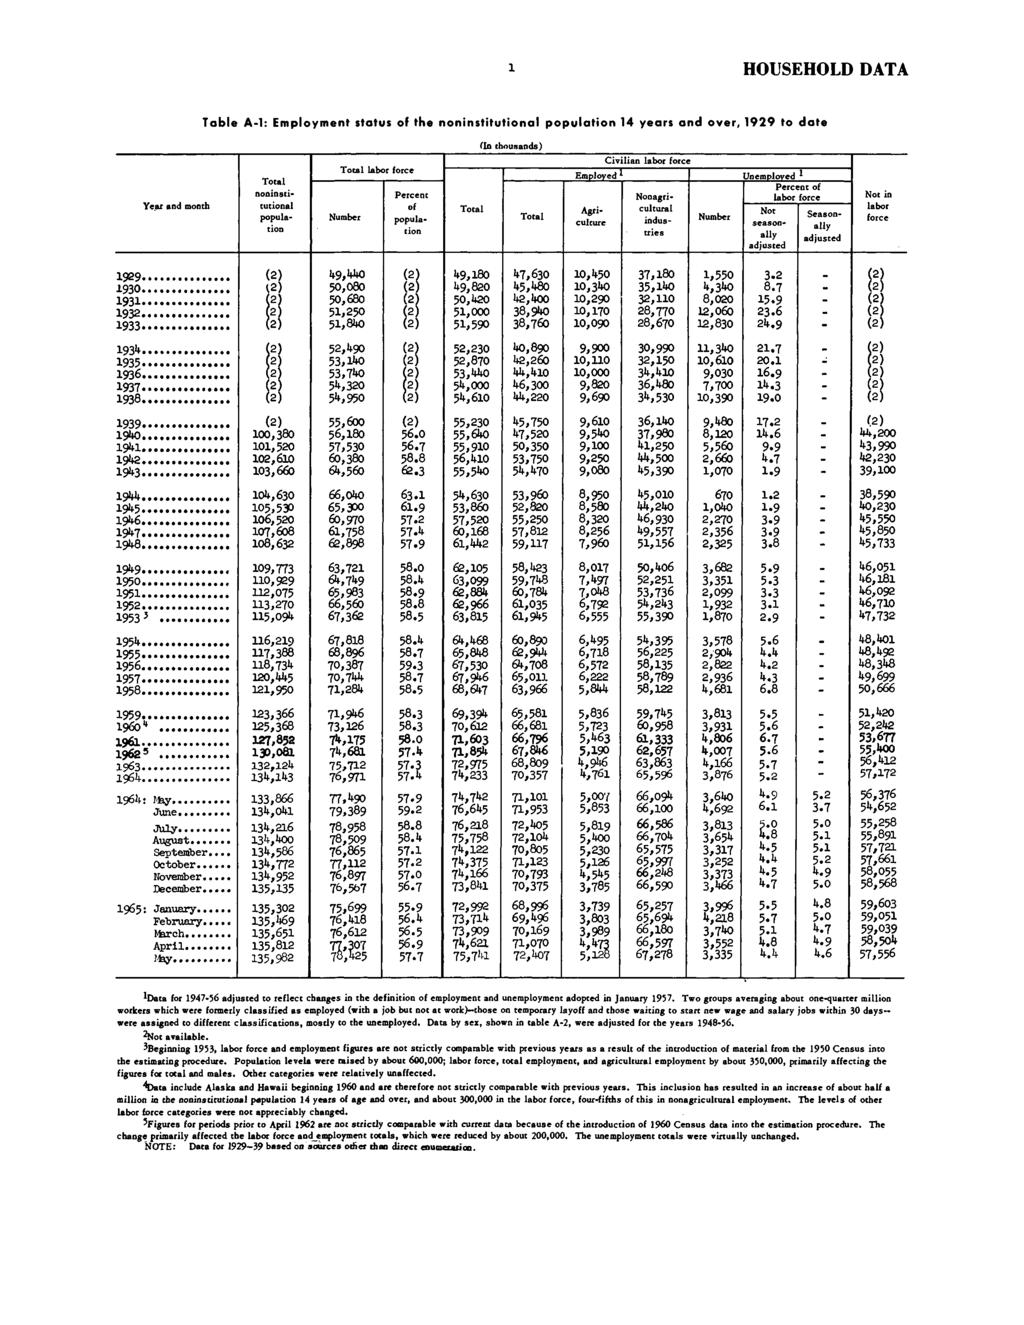 HOUSEHOLD DATA Table A-l: Employment status of the noninstitutional population 14 years and over, 1929 to date Year and month noninstitutional popula- labor force fin thousands) Employed * Civilian